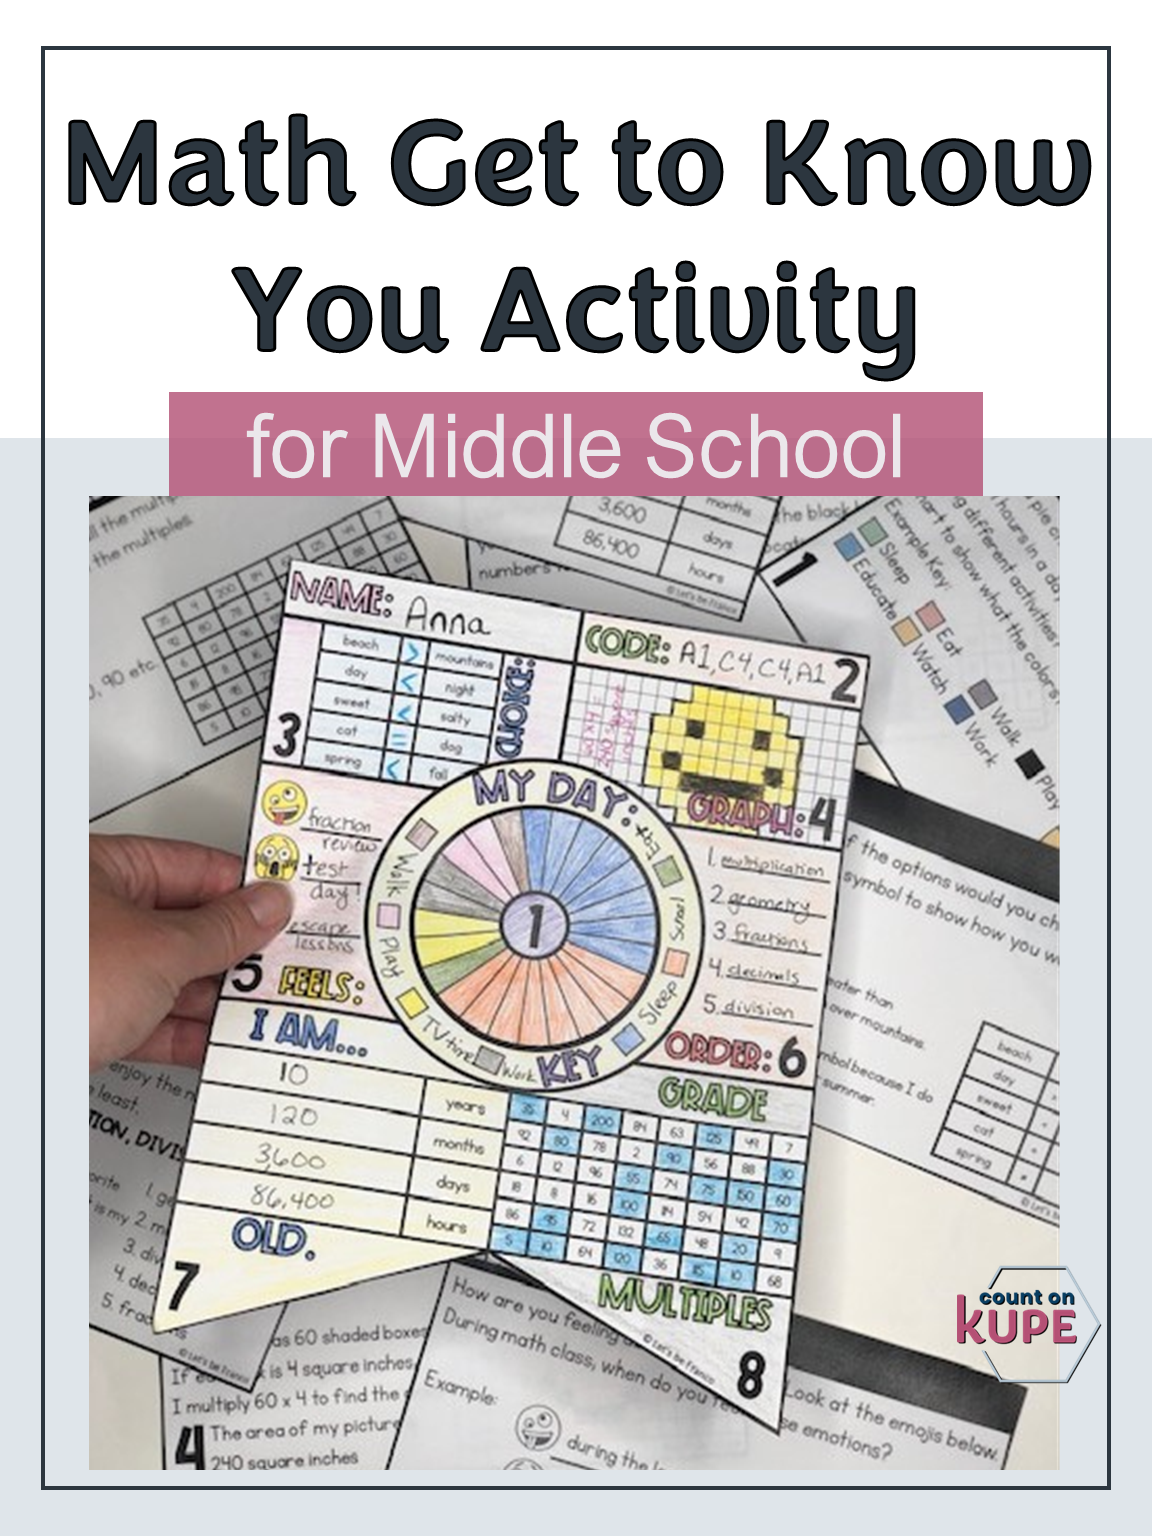 Math Get to Know You Activity for Middle School